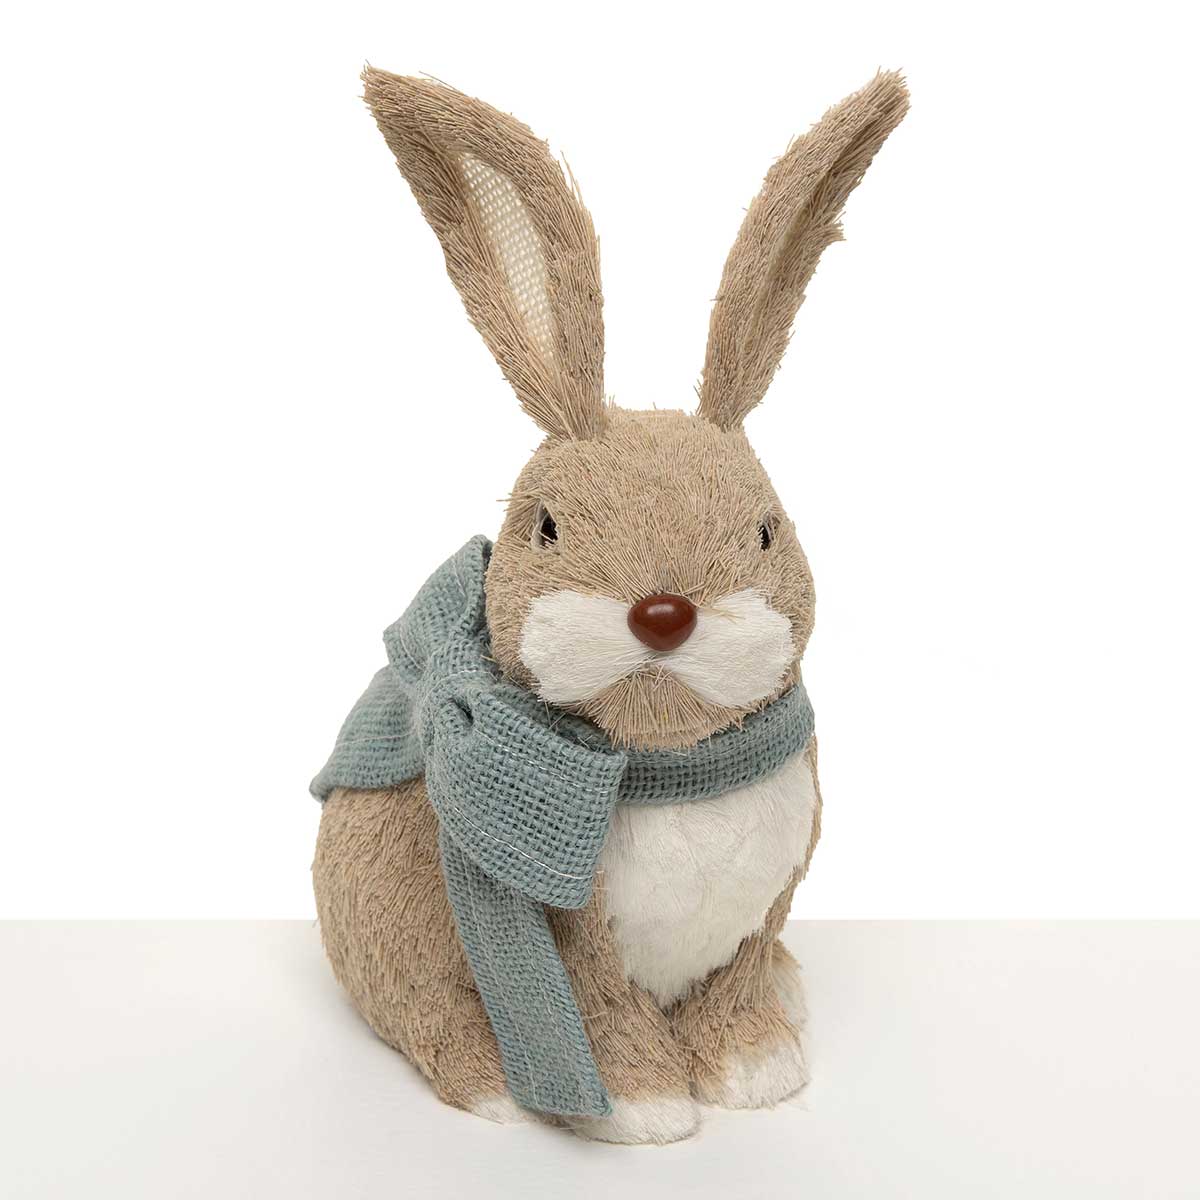 BUNNY COTTONTAIL WITH BLUE BOW 7IN X 4.75IN X 9.5IN SISAL